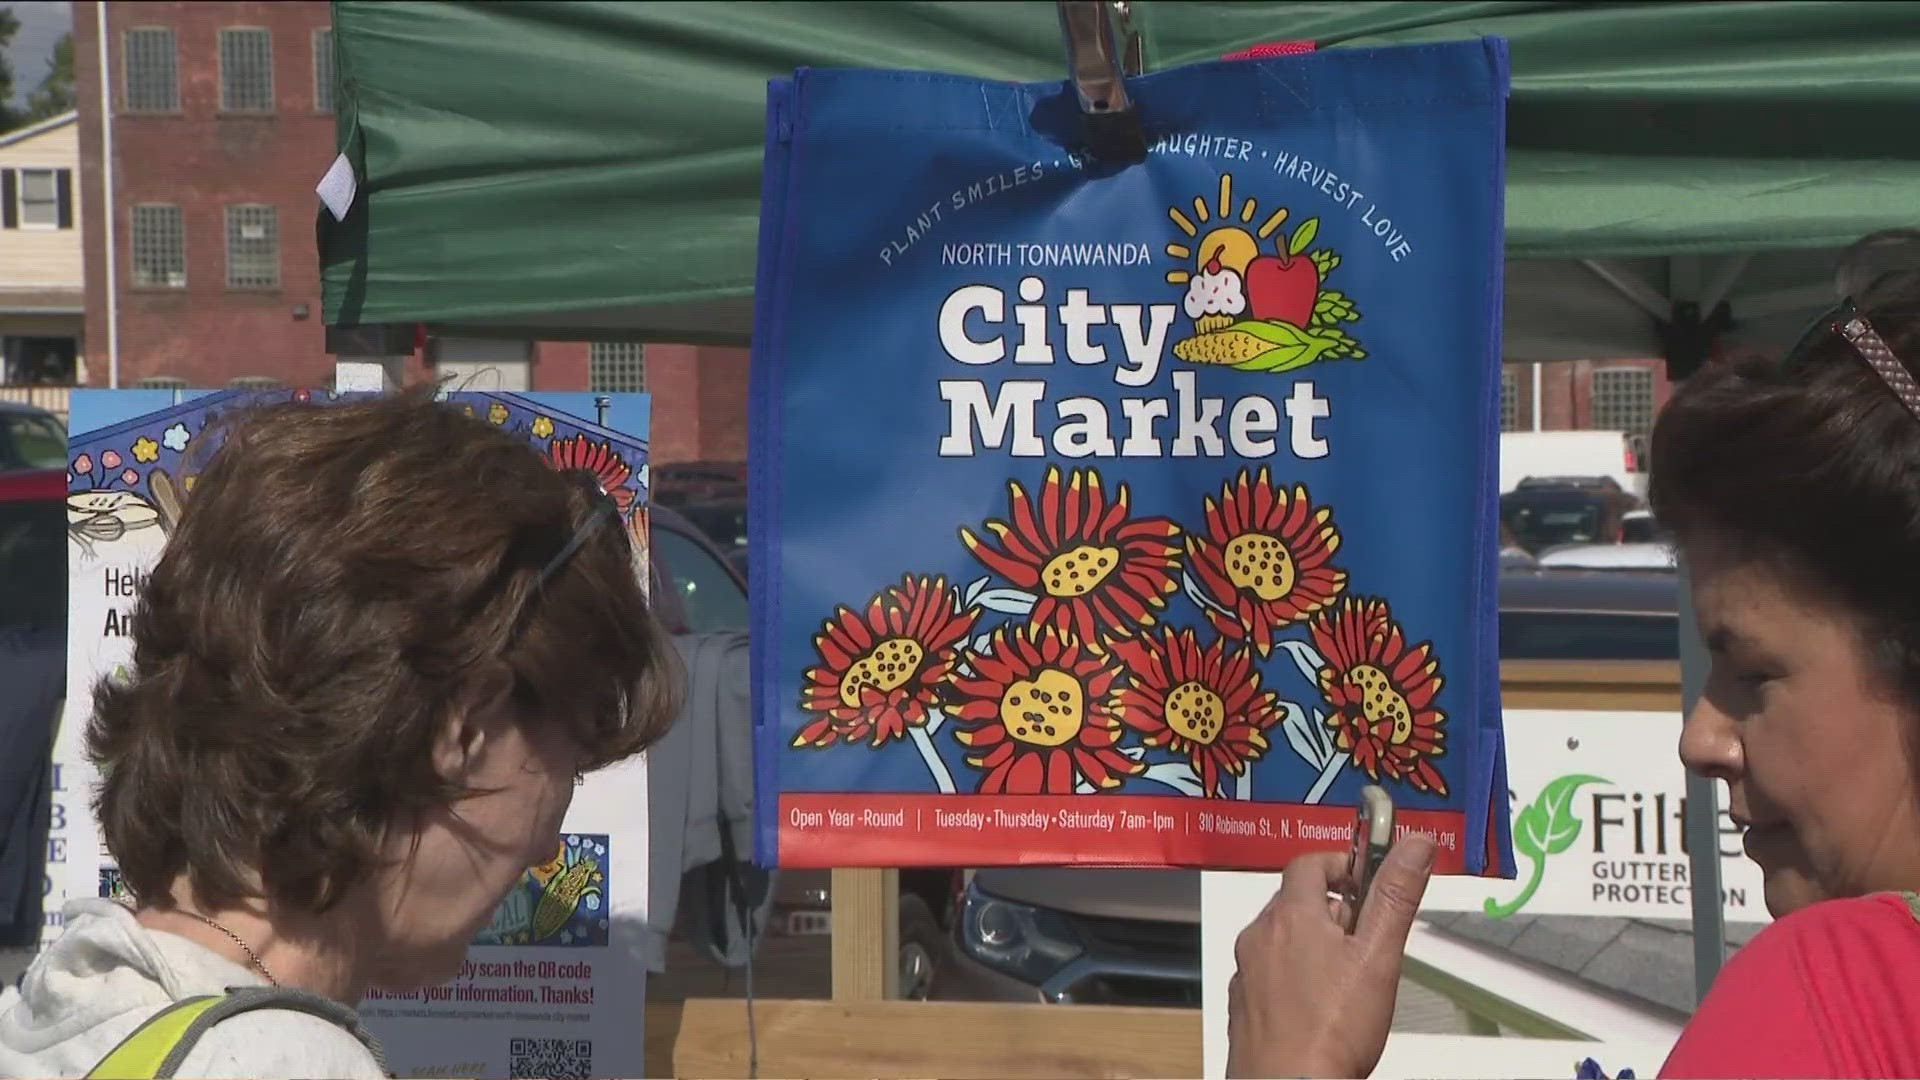 The local farmers market has already claimed the No. 1 spot in New York State and the country's Northeast region.